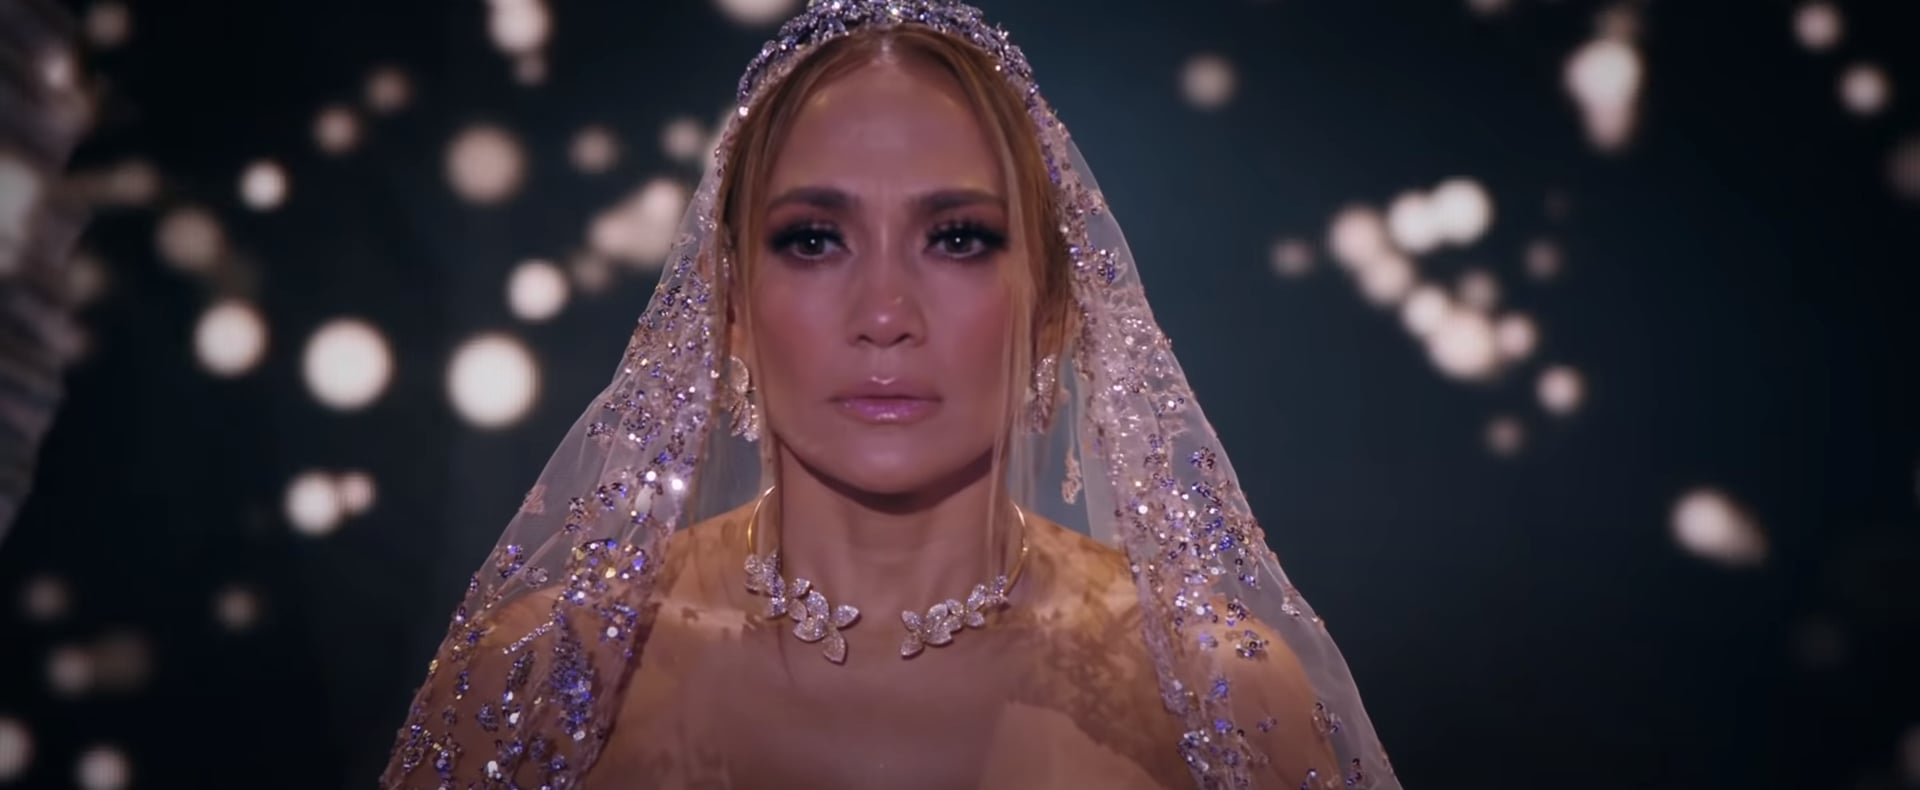 J. Lo: Let's Get Real (FULL MOVIE) 